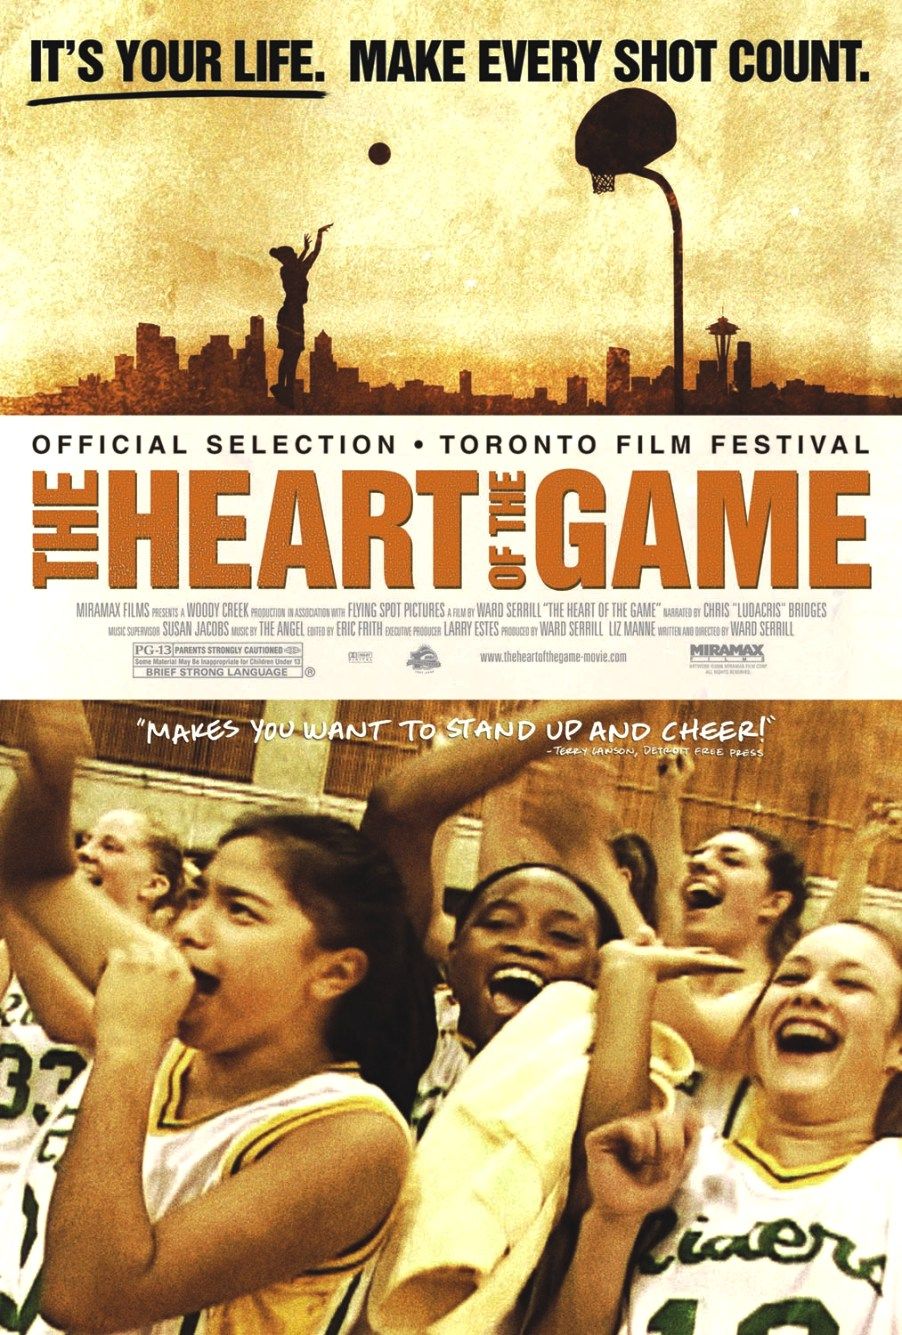 Extra Large Movie Poster Image for The Heart of the Game 